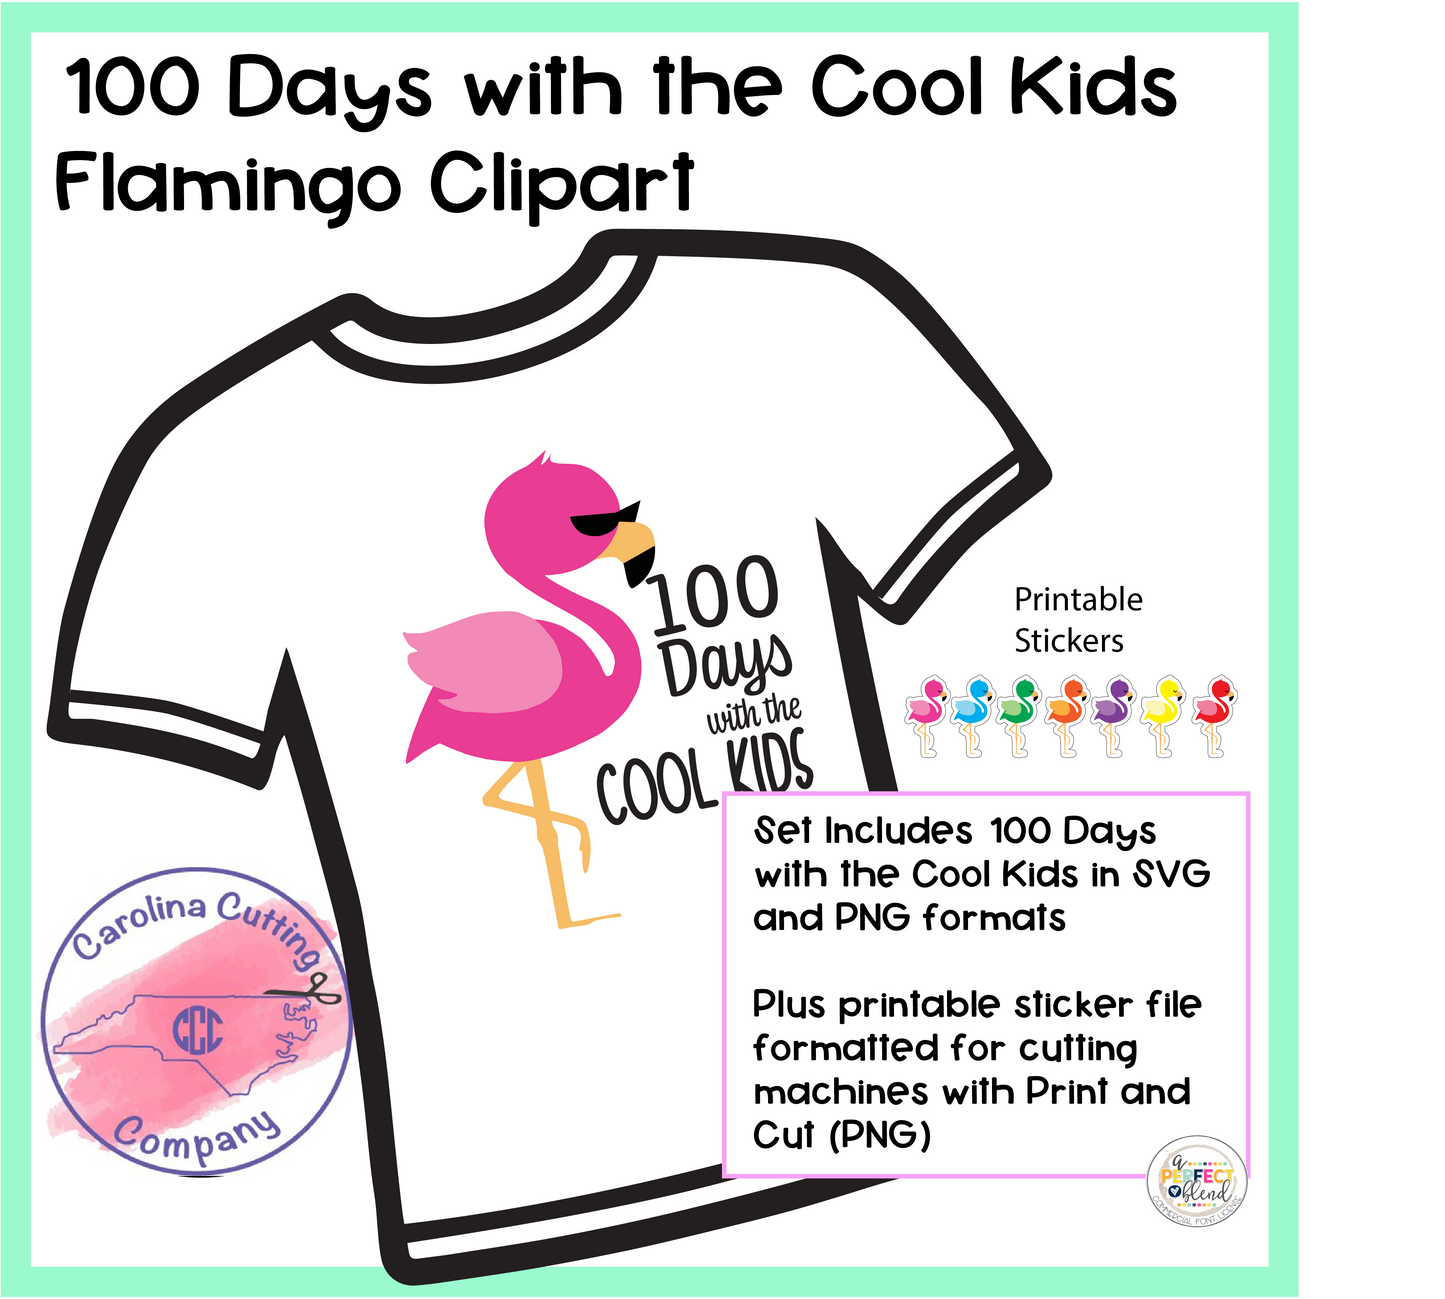 Digital File:  100 Days With the Cool Kids Flamingo Design and Stickers for Cricut